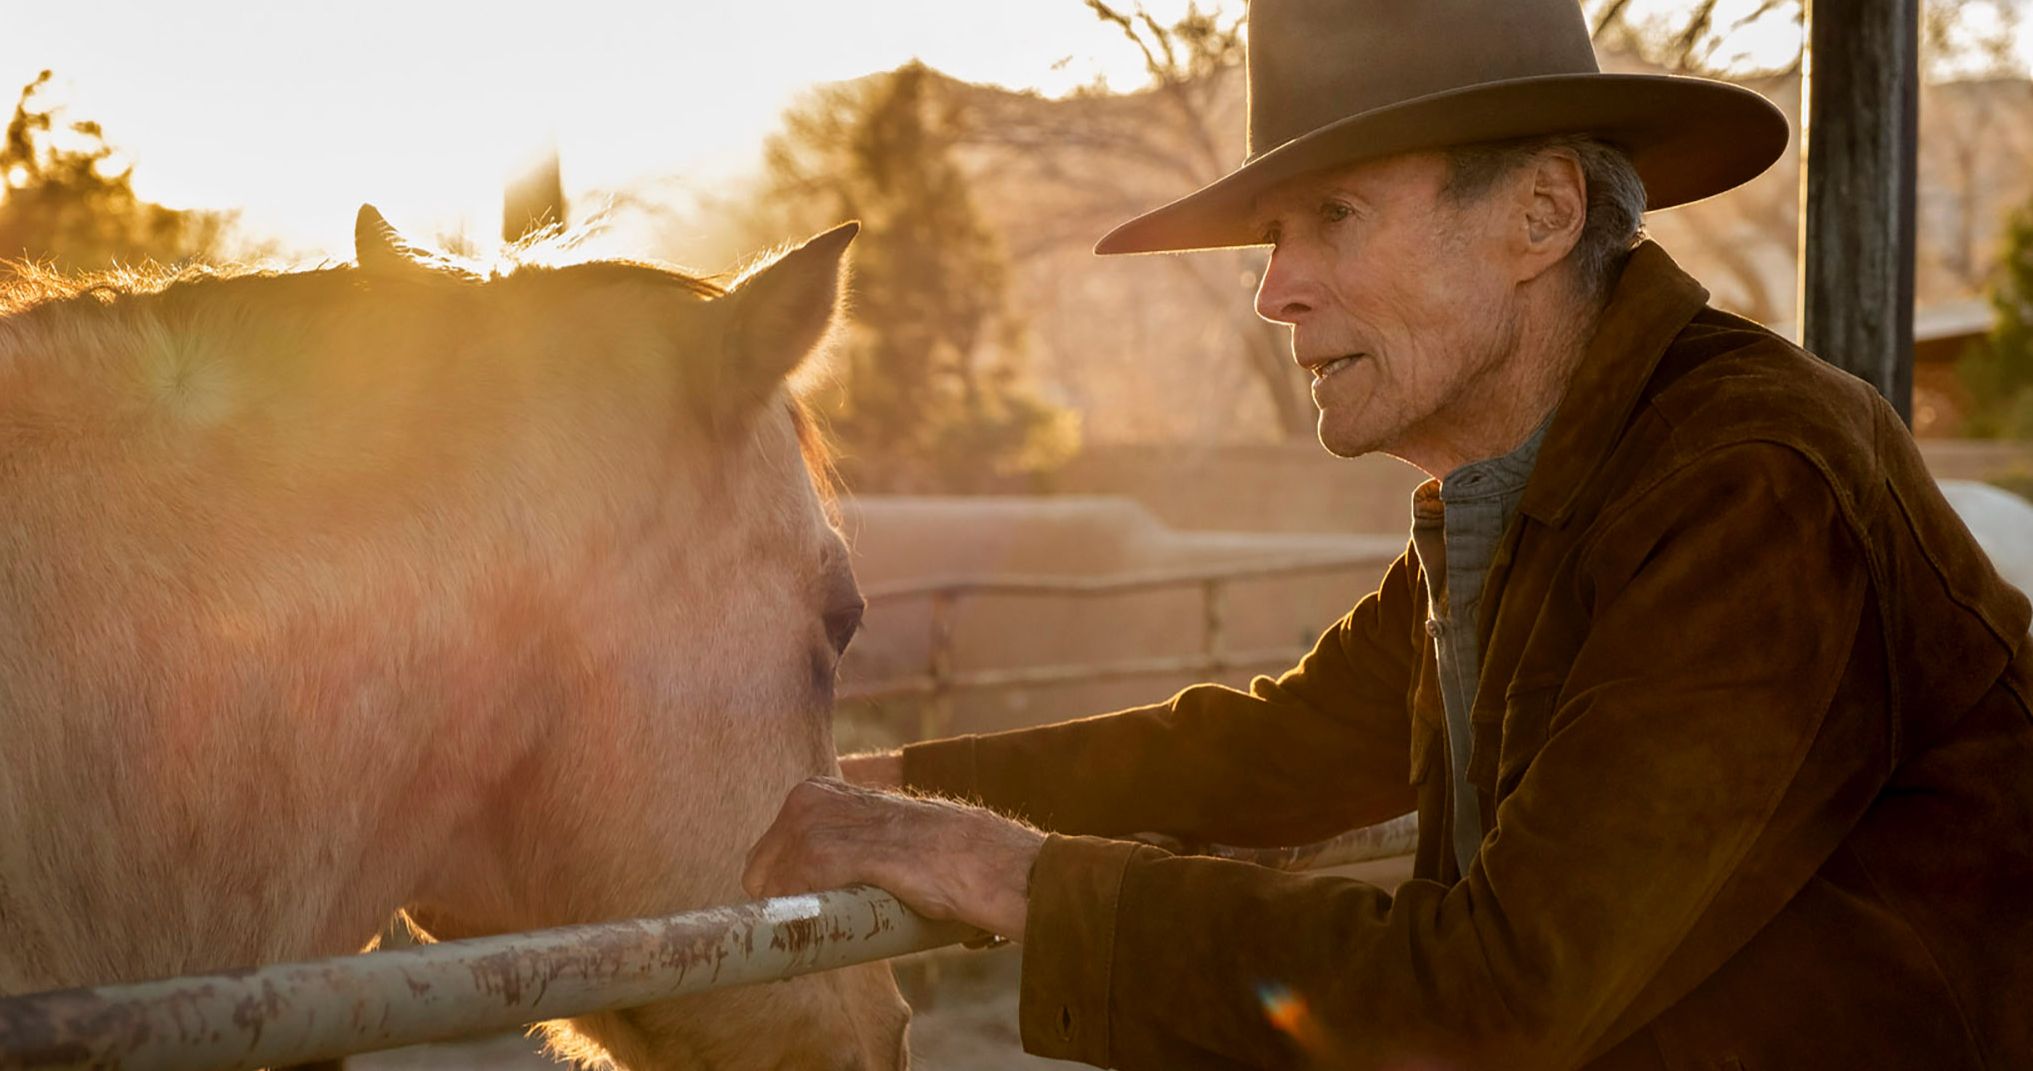 Cry Macho Trailer: Clint Eastwood Is a Washed-Up Rodeo Star on an Unexpected Journey